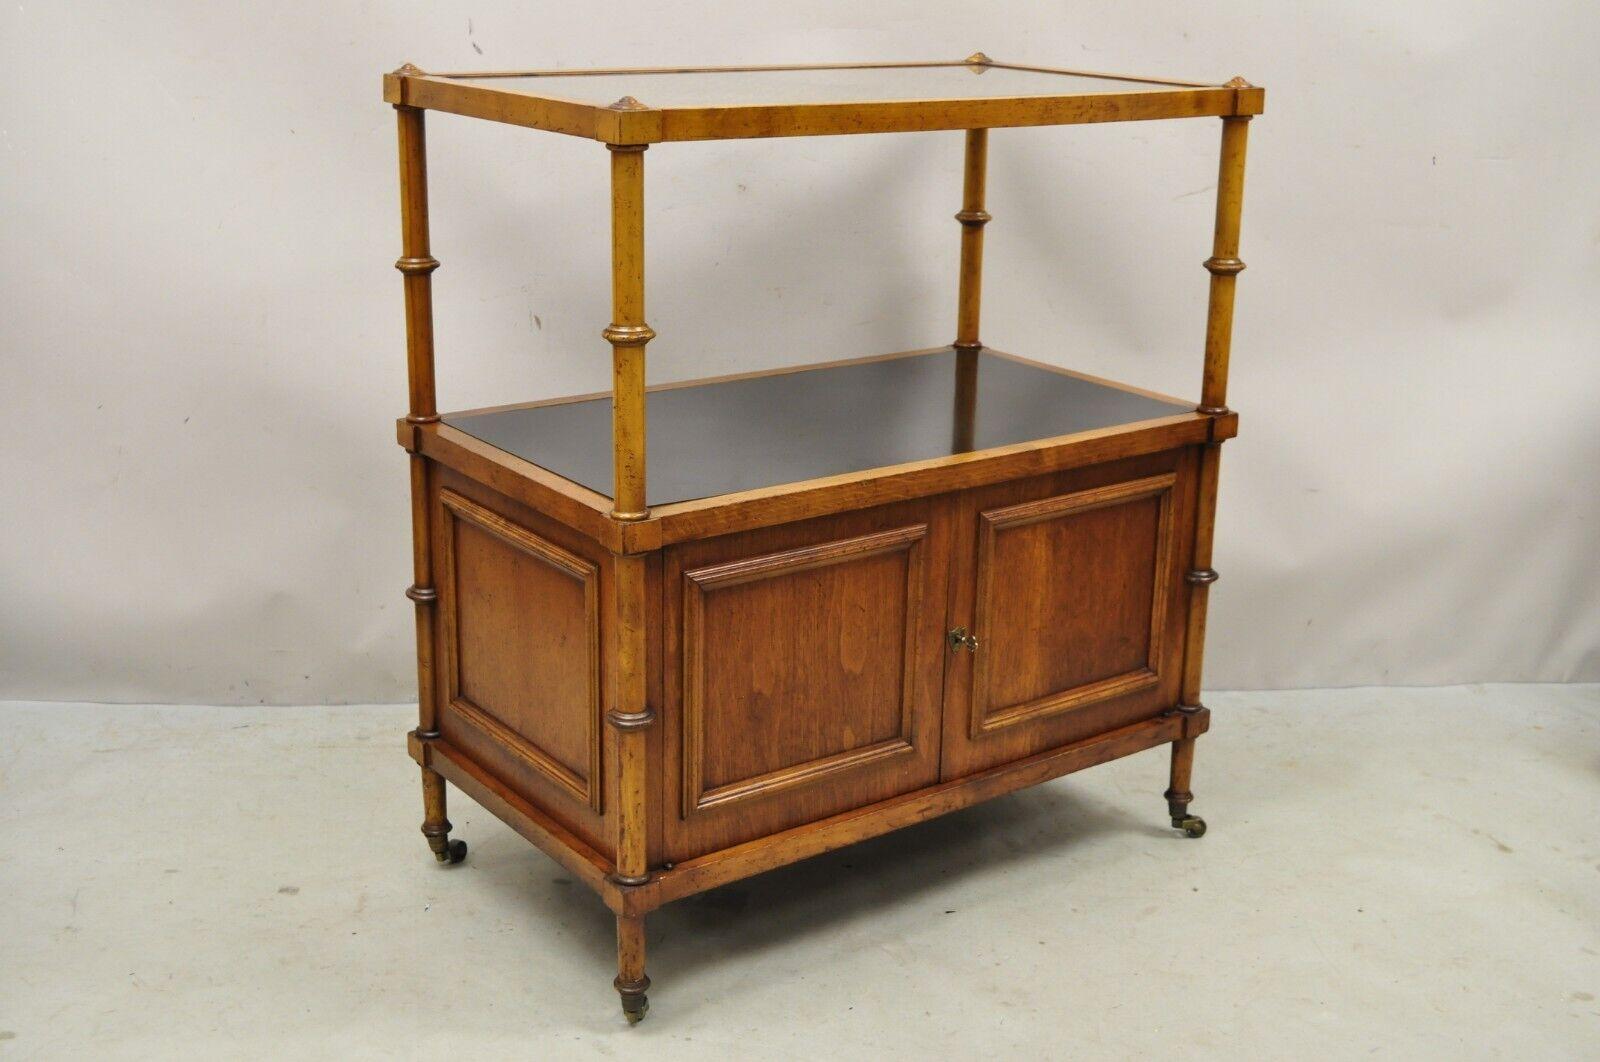 Vintage Faux Bamboo Hollywood Regency 2 Tier Cane Top Bar Cart Server Cabinet. Item features a cane top with glass surface, black laminate lower shelf, rolling casters, finished back, 2 swing doors, working lock and key, very nice vintage item.